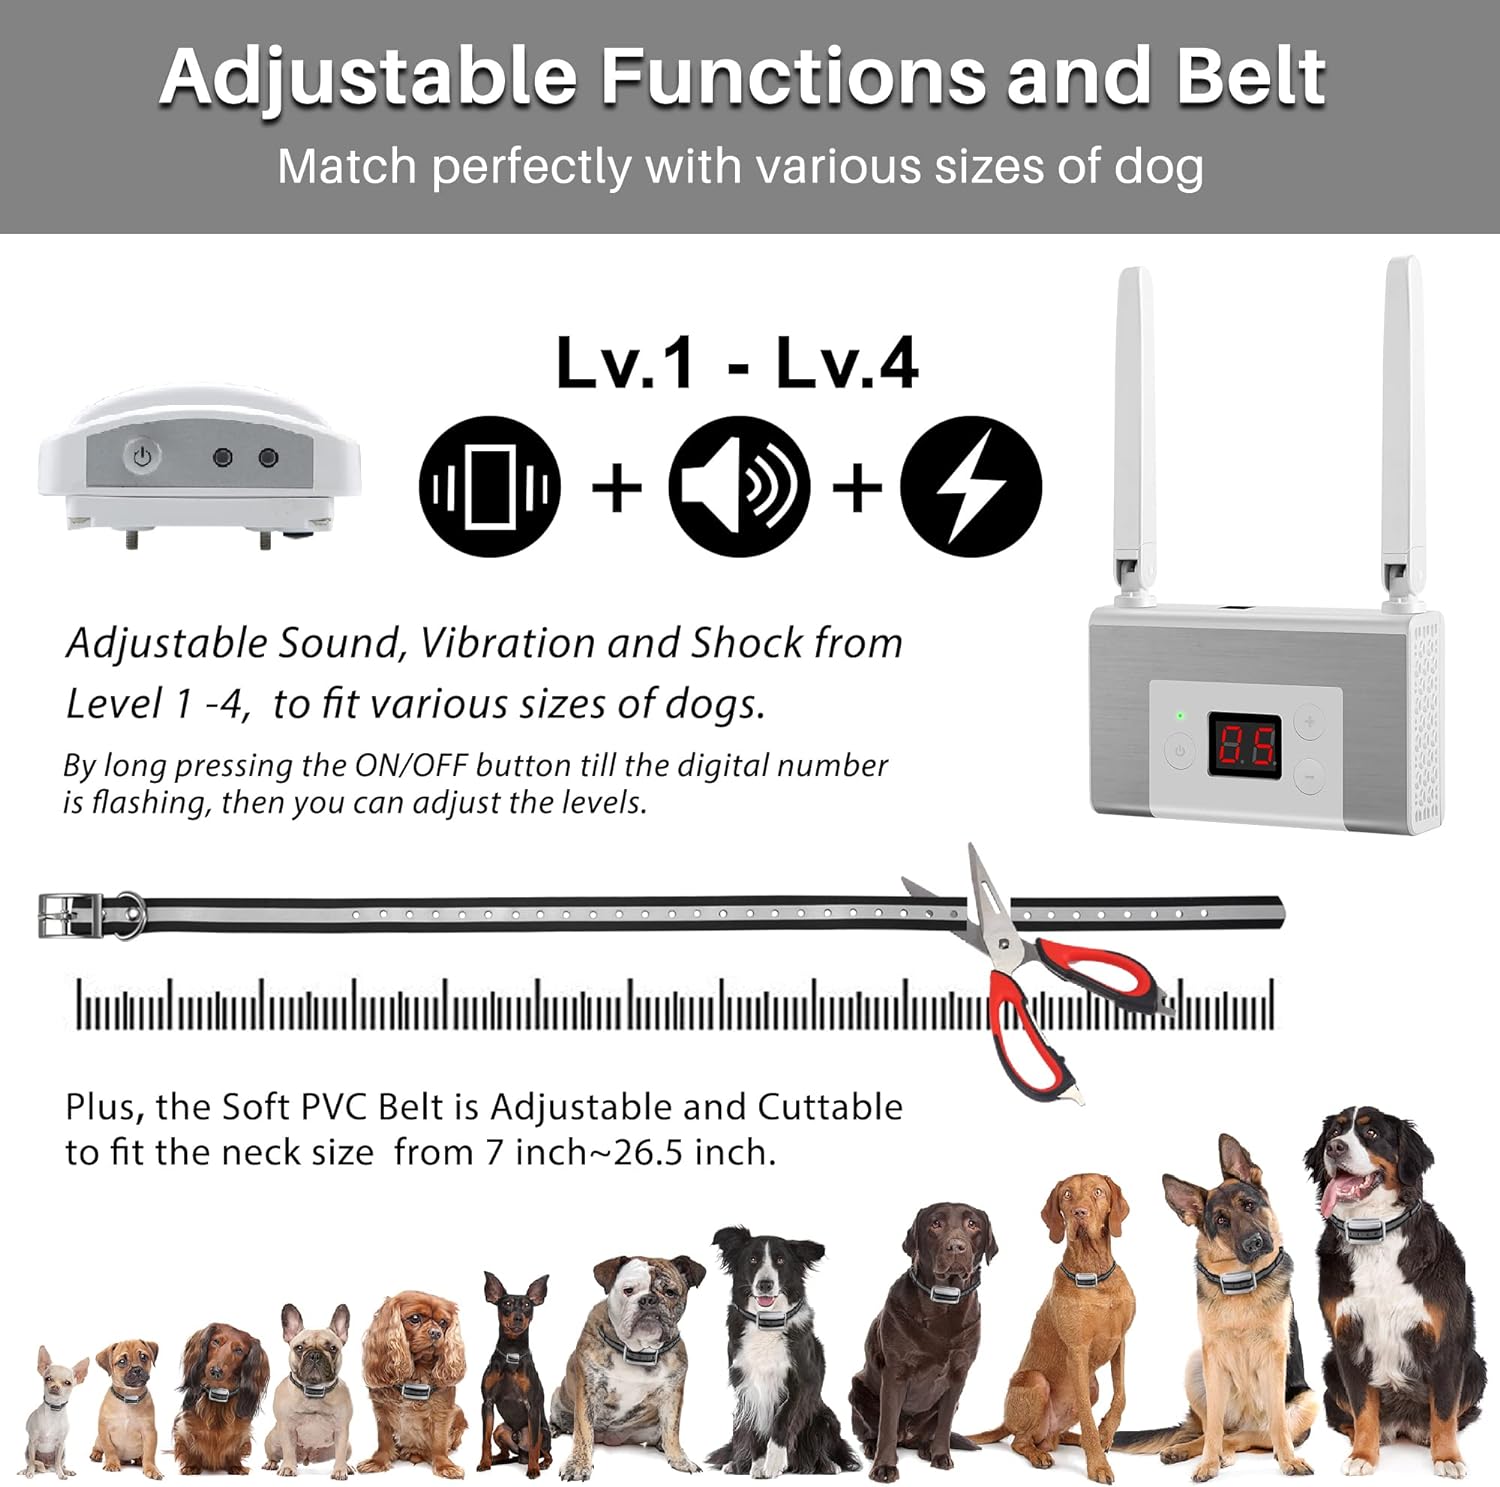 Blingbling Petsfun Electric Wireless Dog Fence System, Pet Containment System with Waterproof and Rechargeable Training Collar Receiver for 1 Dogs Pets Container Boundary (White)